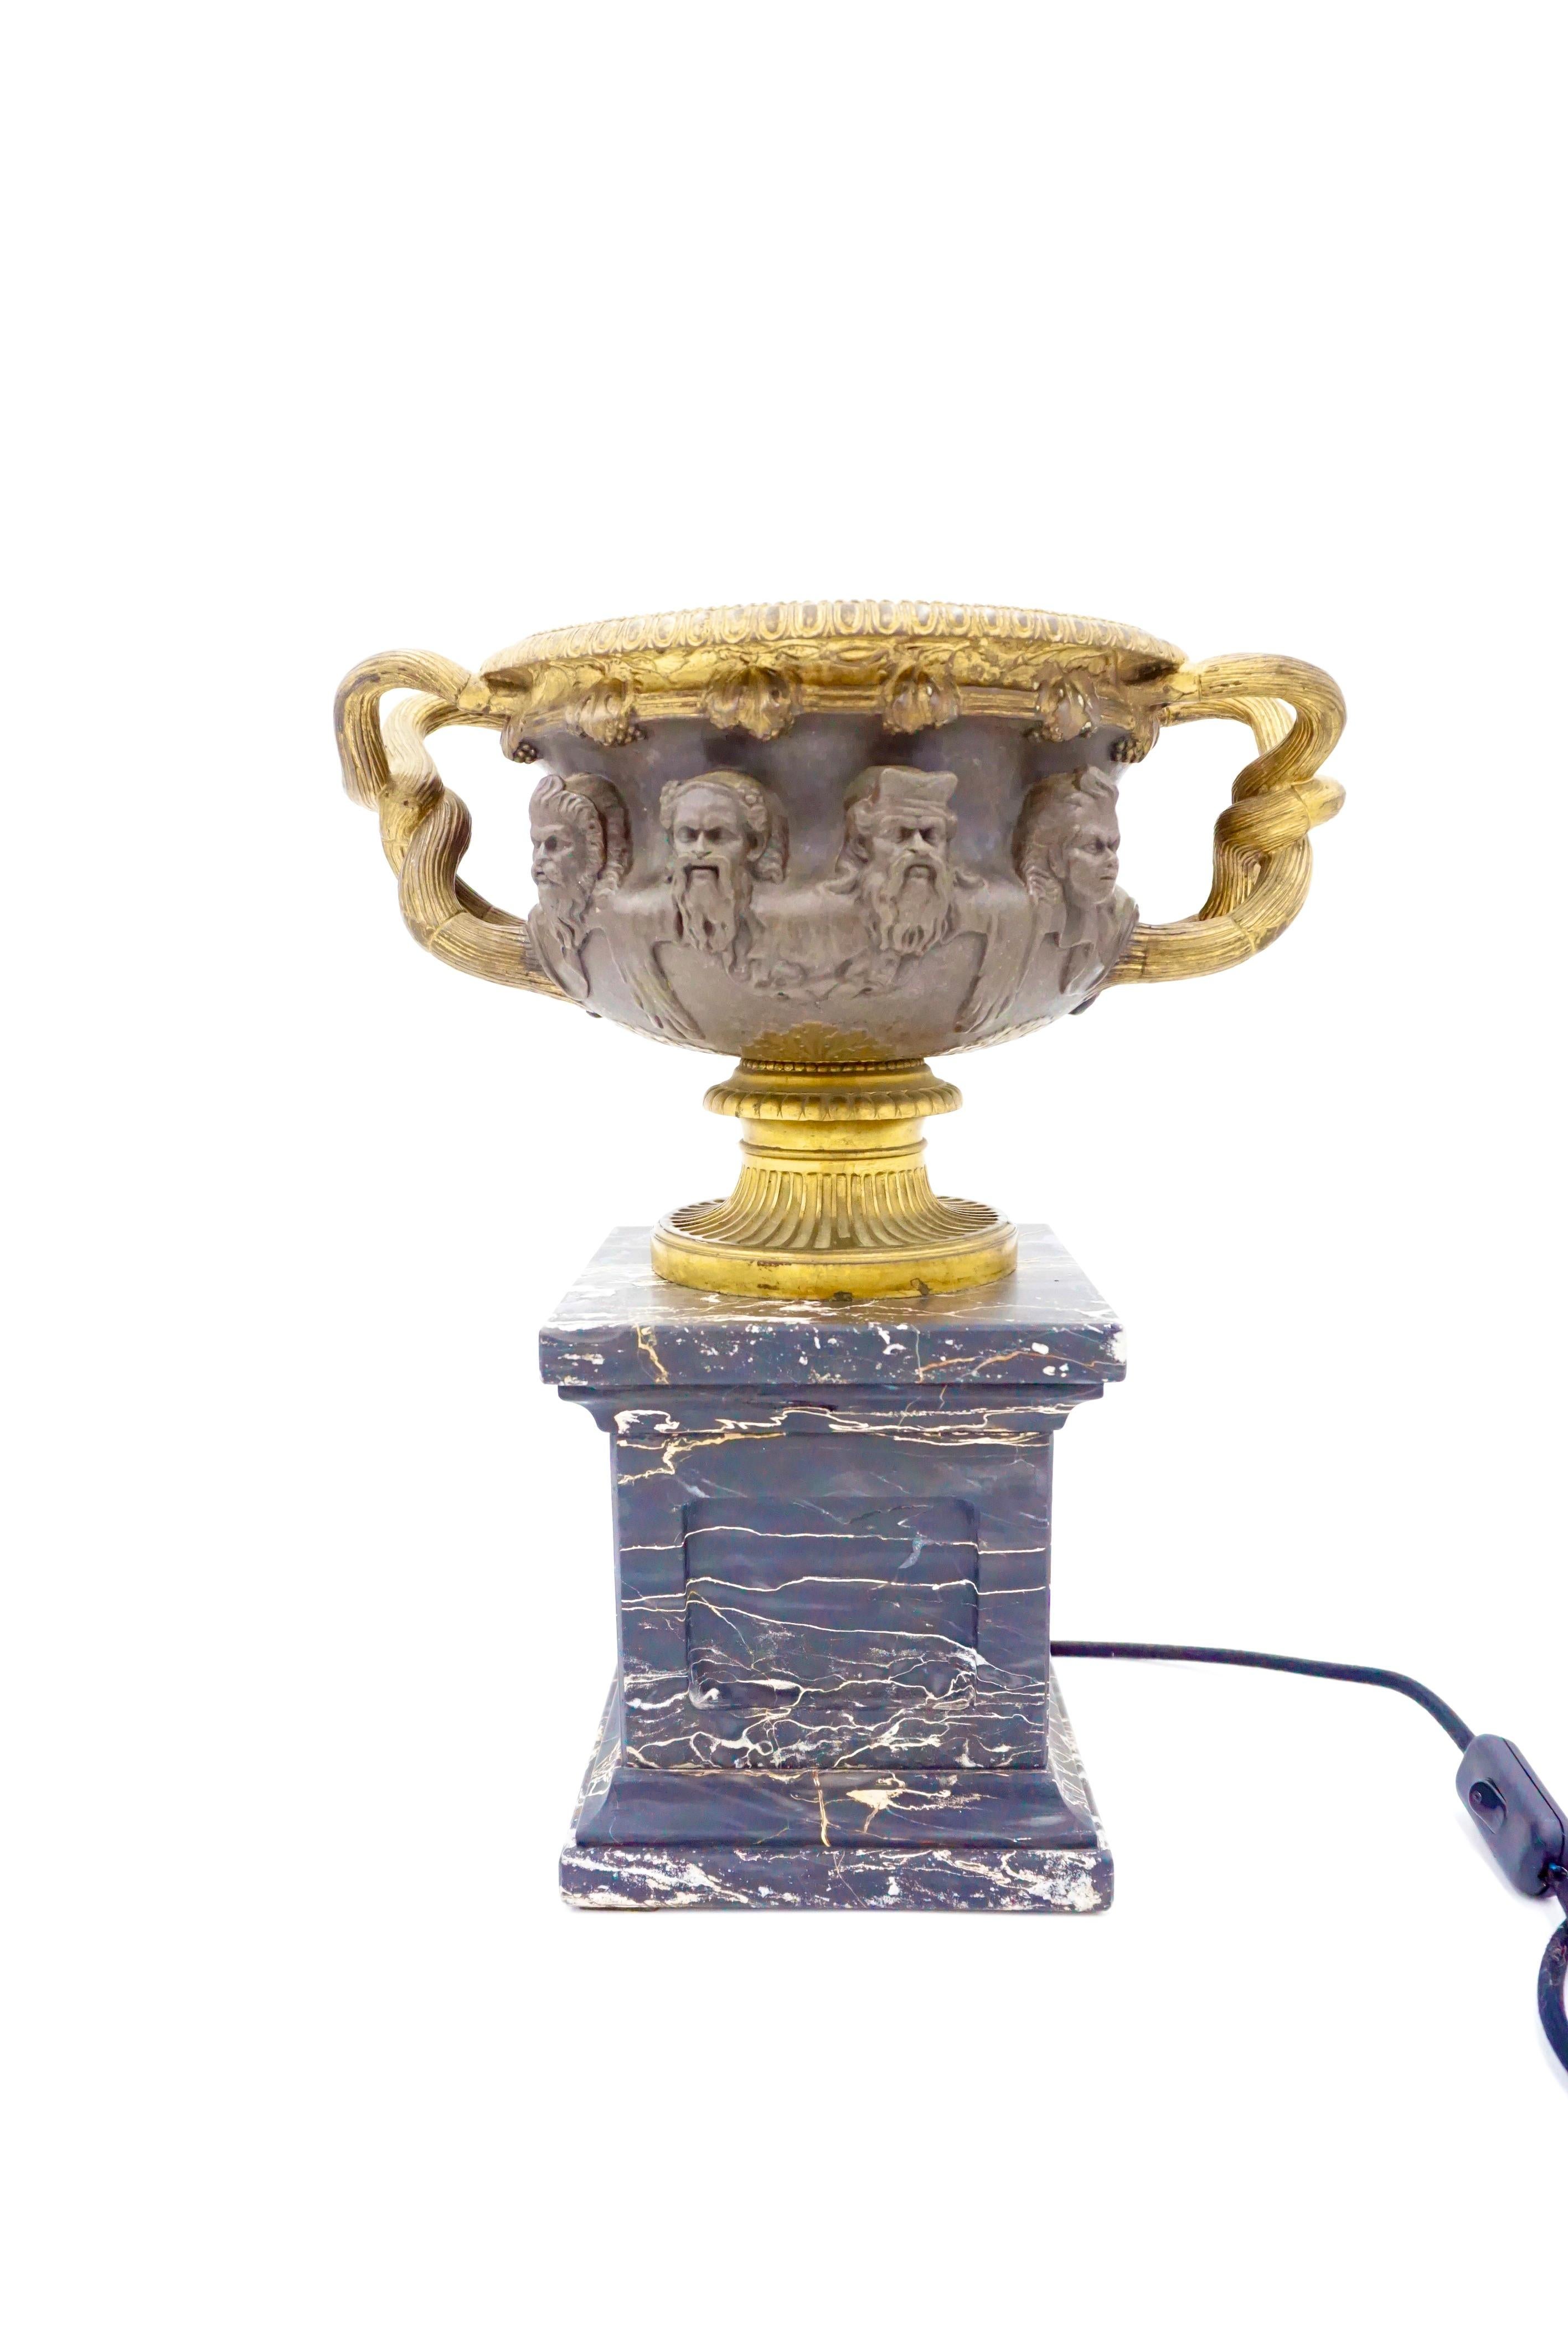 Grand Tour Bronze and Gilt Warwick Vase Lamp on Portoro Marble Basis, by Barbadienne, 1860 For Sale